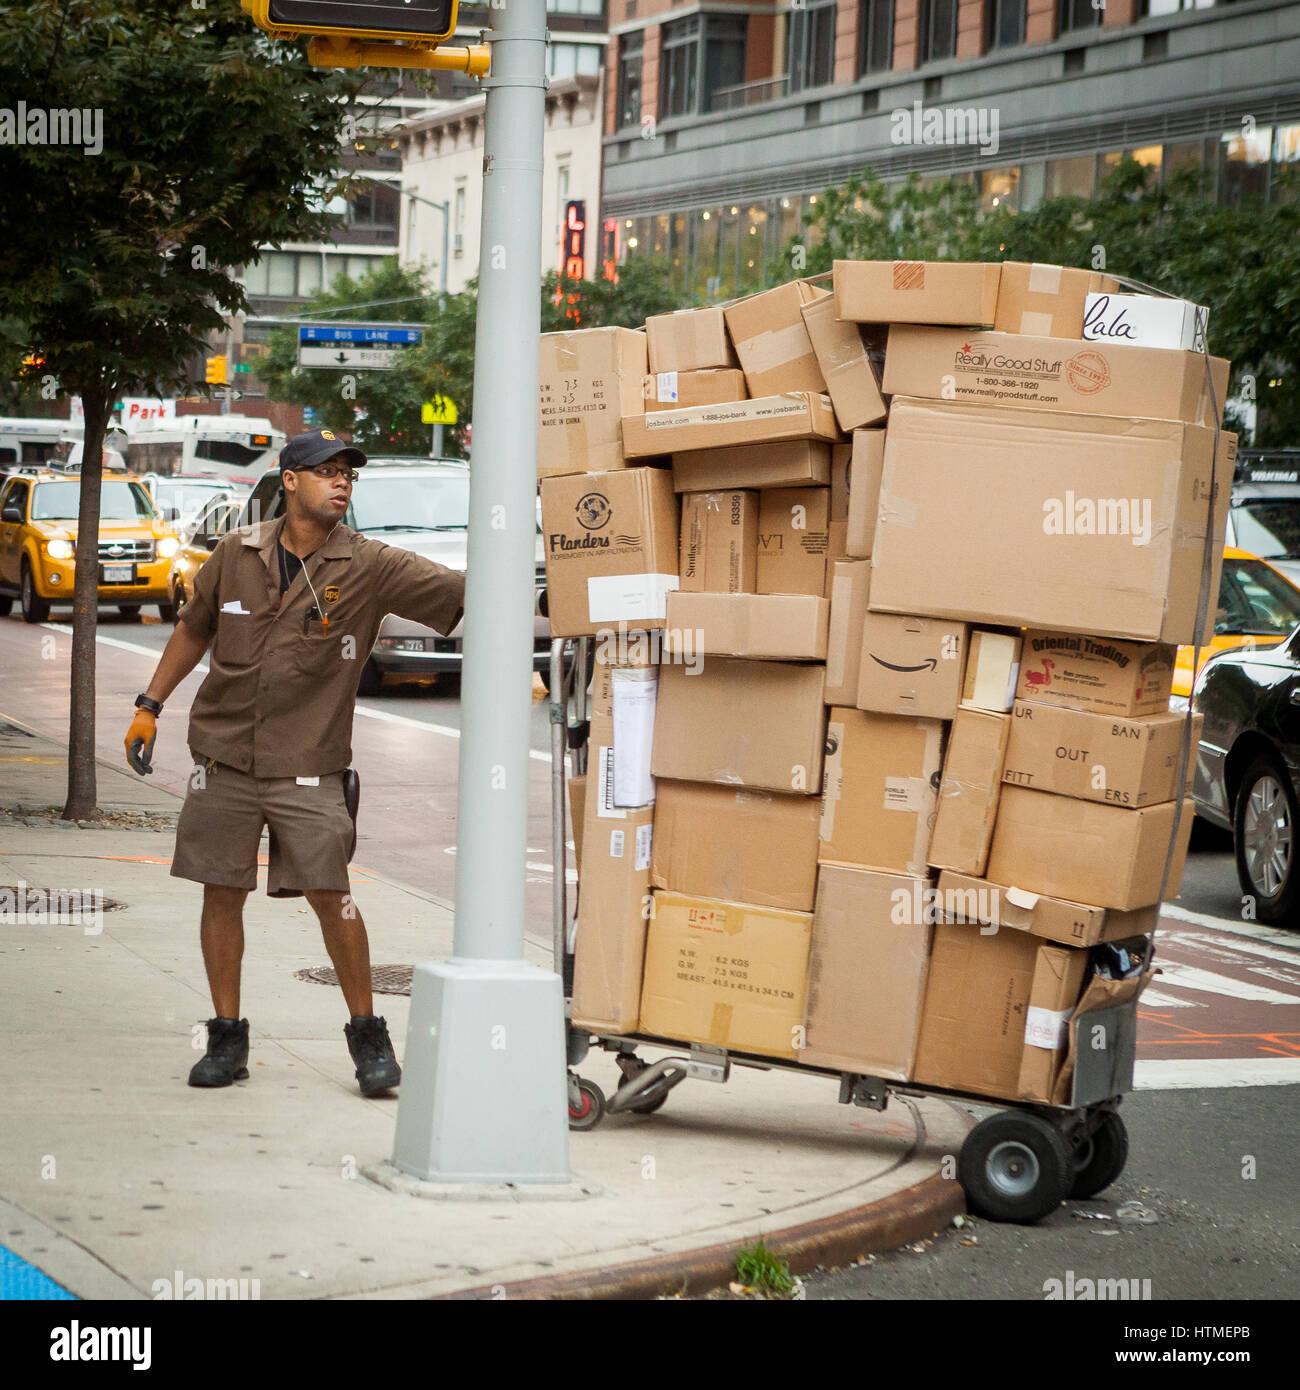 UPS (United Parcel Service) employee pulls a cart stacked high with packages over a curb during deliveries in New York City. Stock Photo